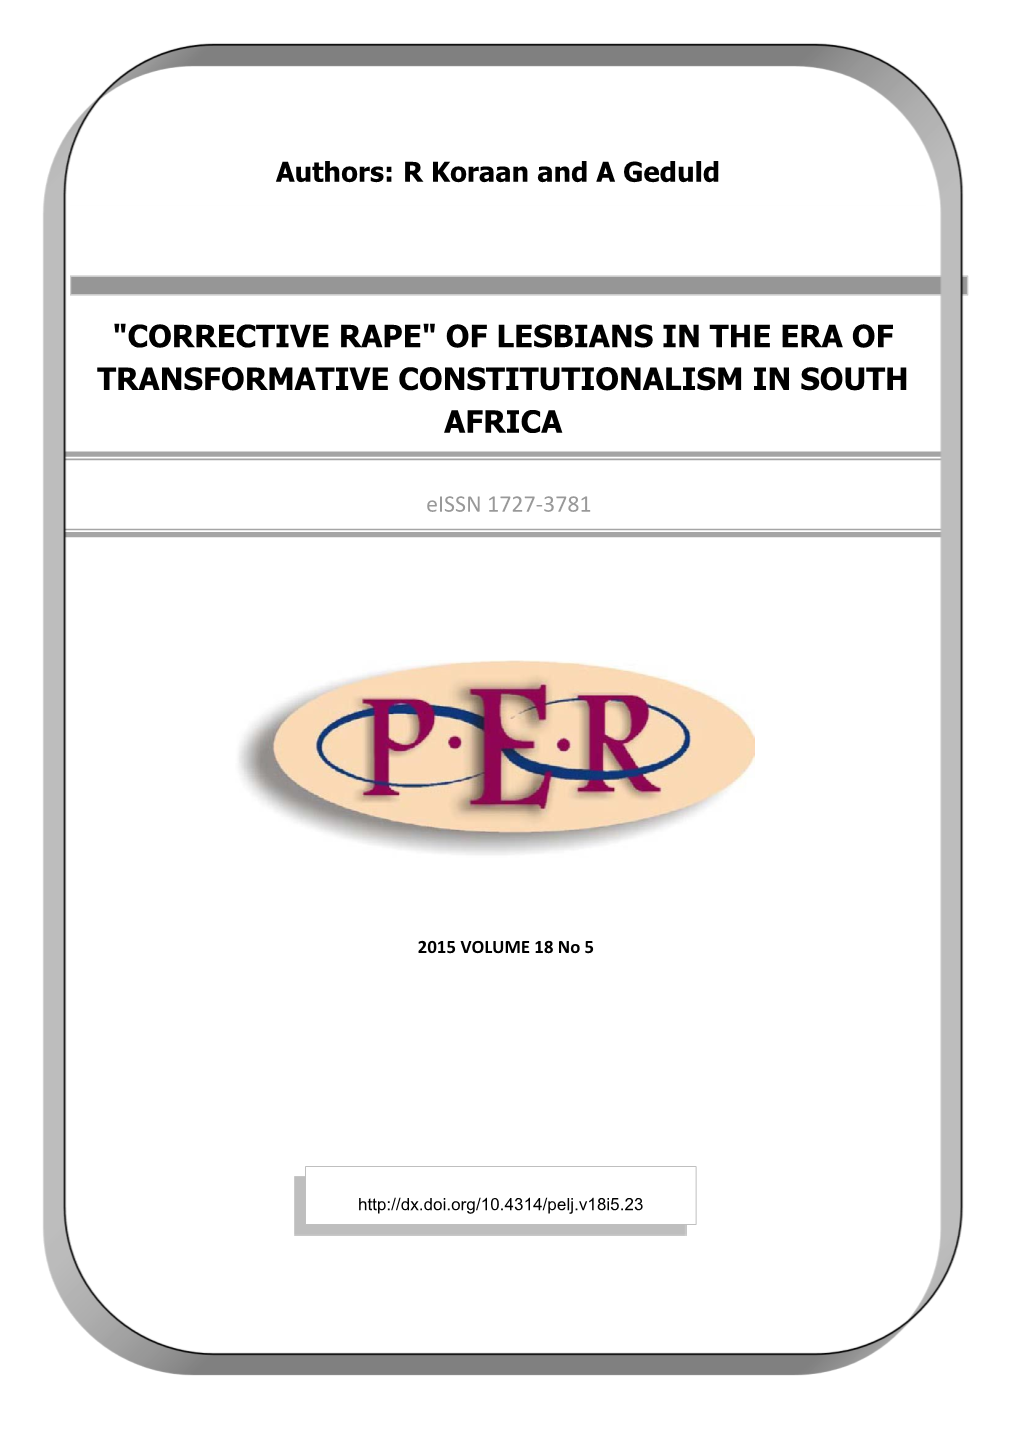 Of Lesbians in the Era of Transformative Constitutionalism in South Africa